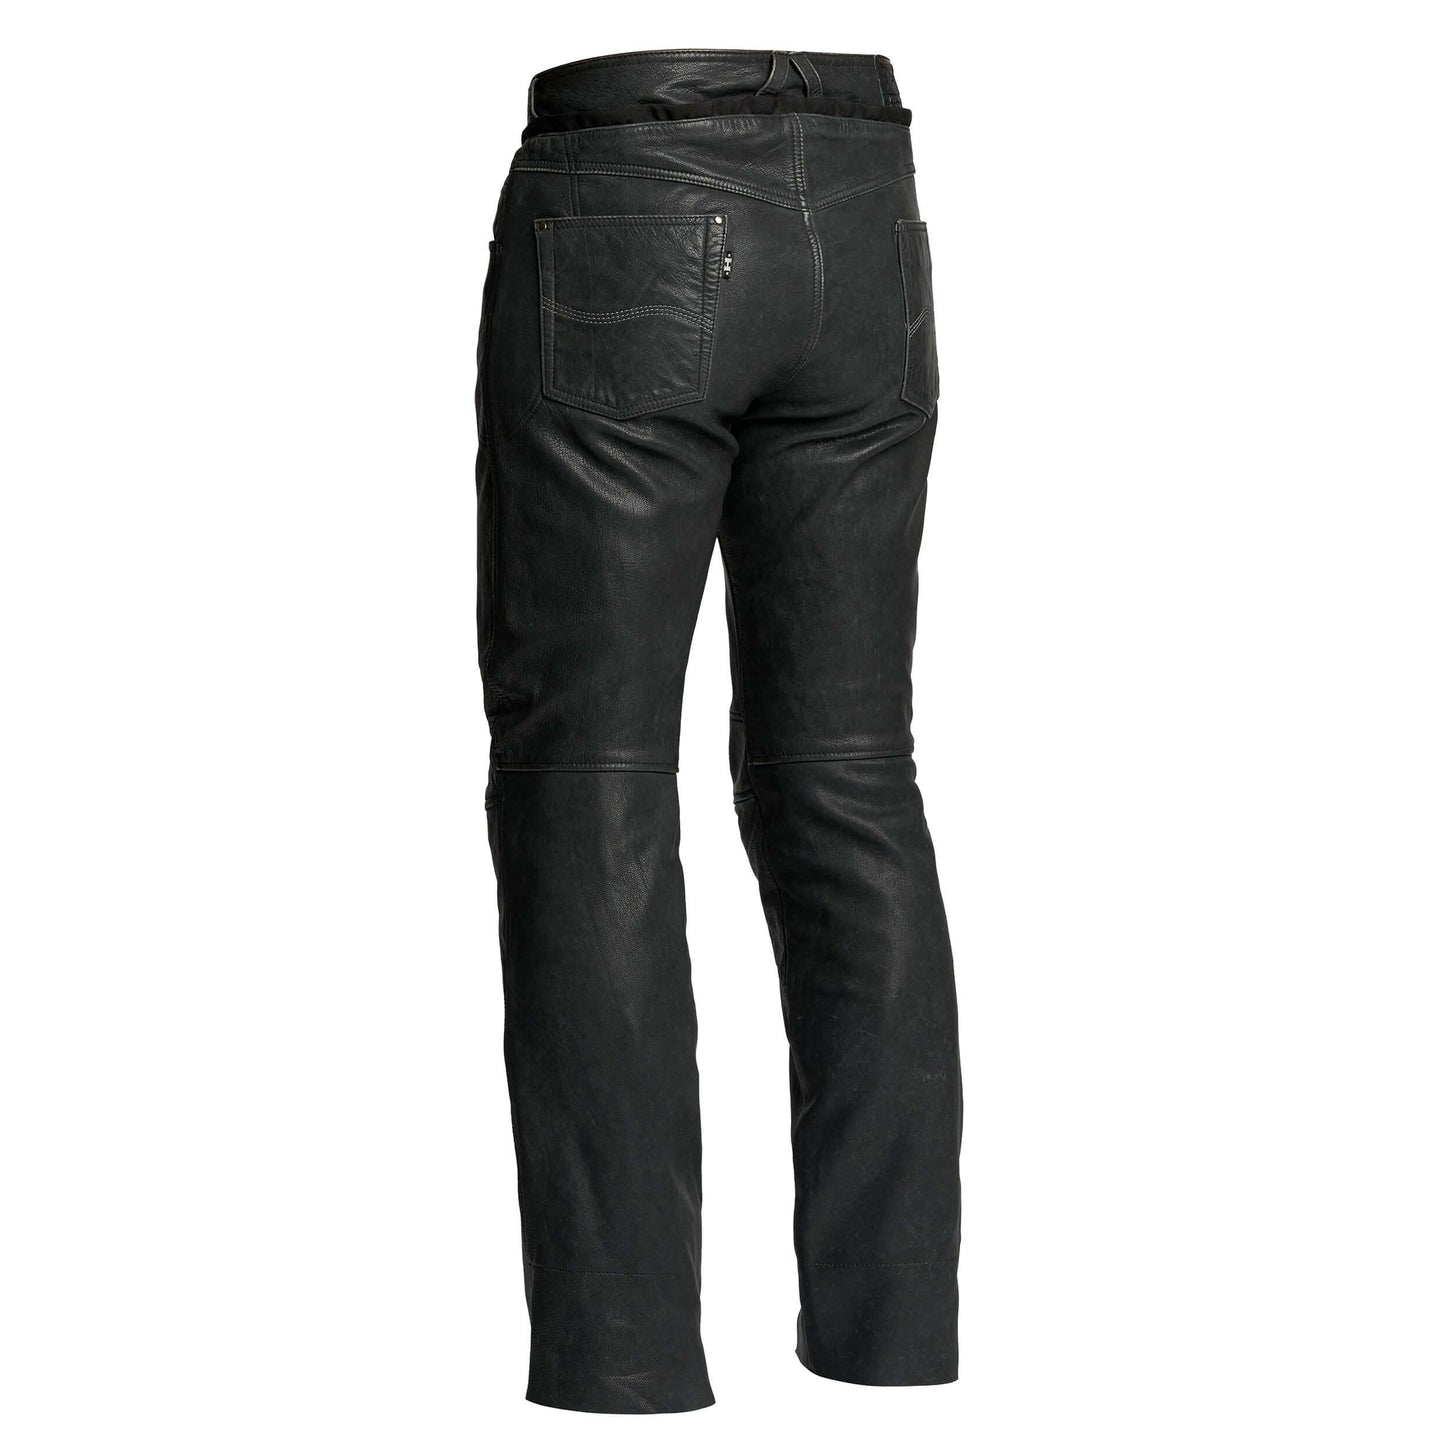 Halvarssons Seth, classic leather, retro jeans style five pocket leather pants